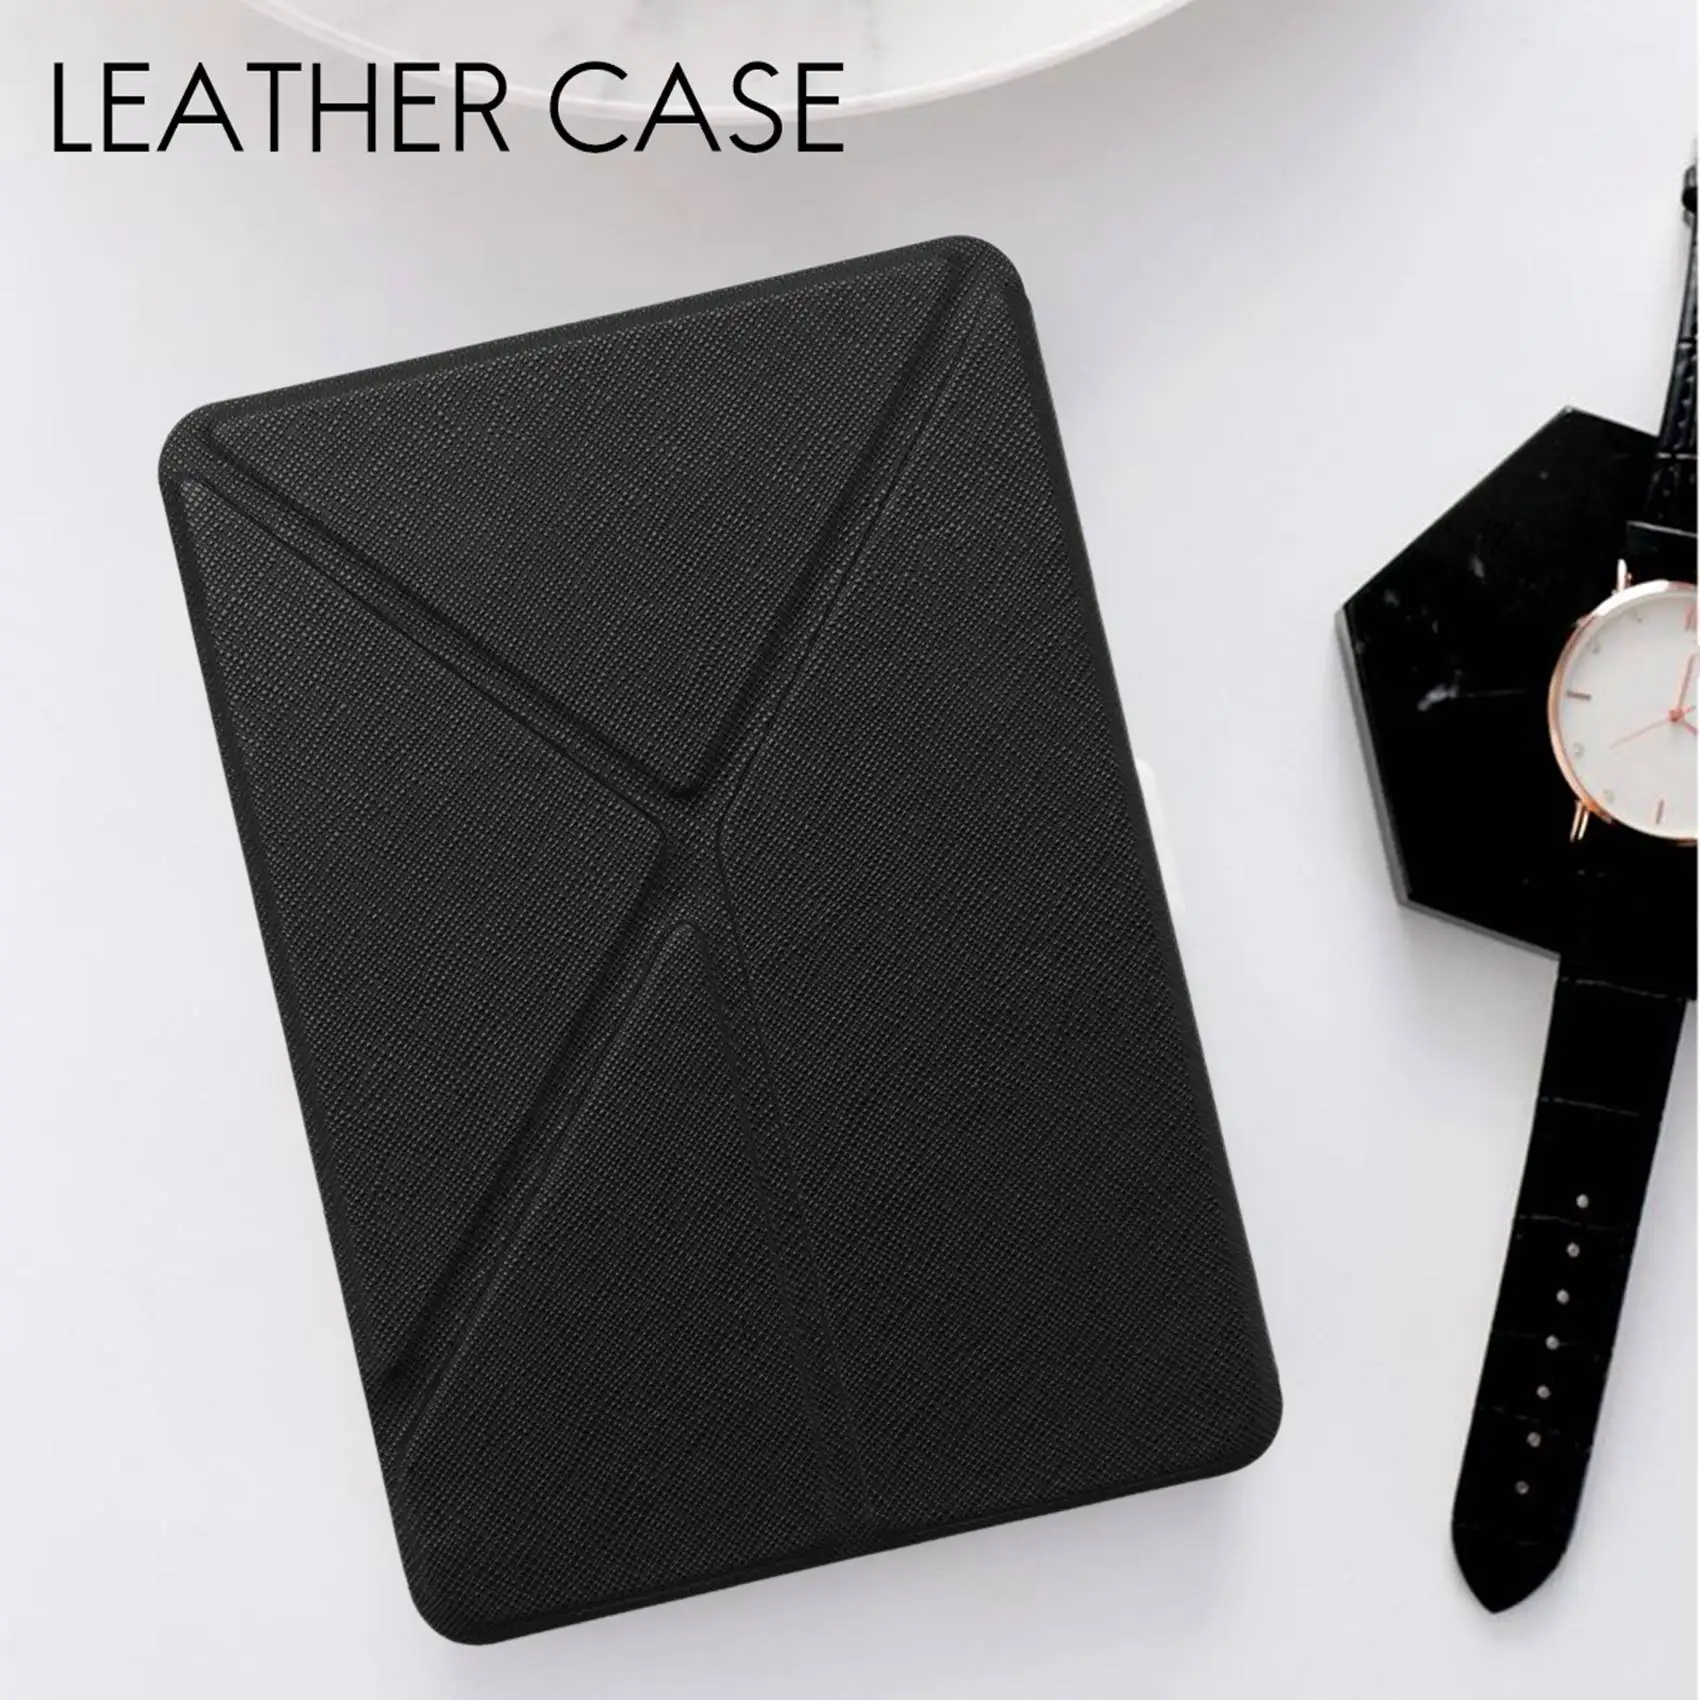 

PU Leather Stand Case for Amazon Kindle Paperwhite 4 6 Inch 10Th 2018 Release E-Reader Cover Generation Black